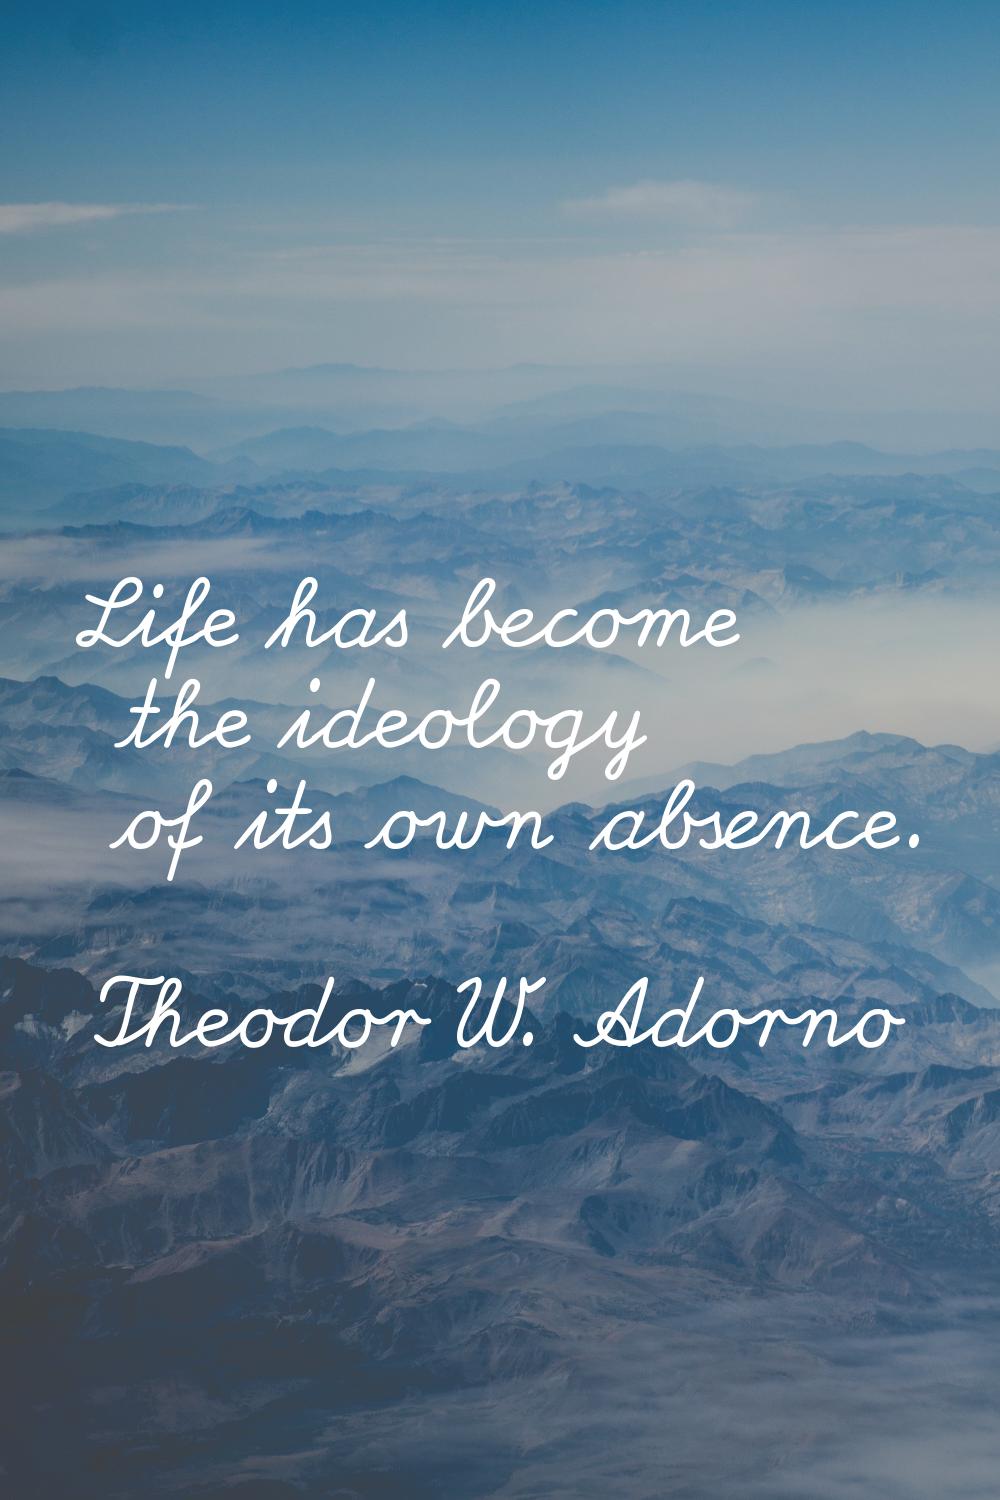 Life has become the ideology of its own absence.